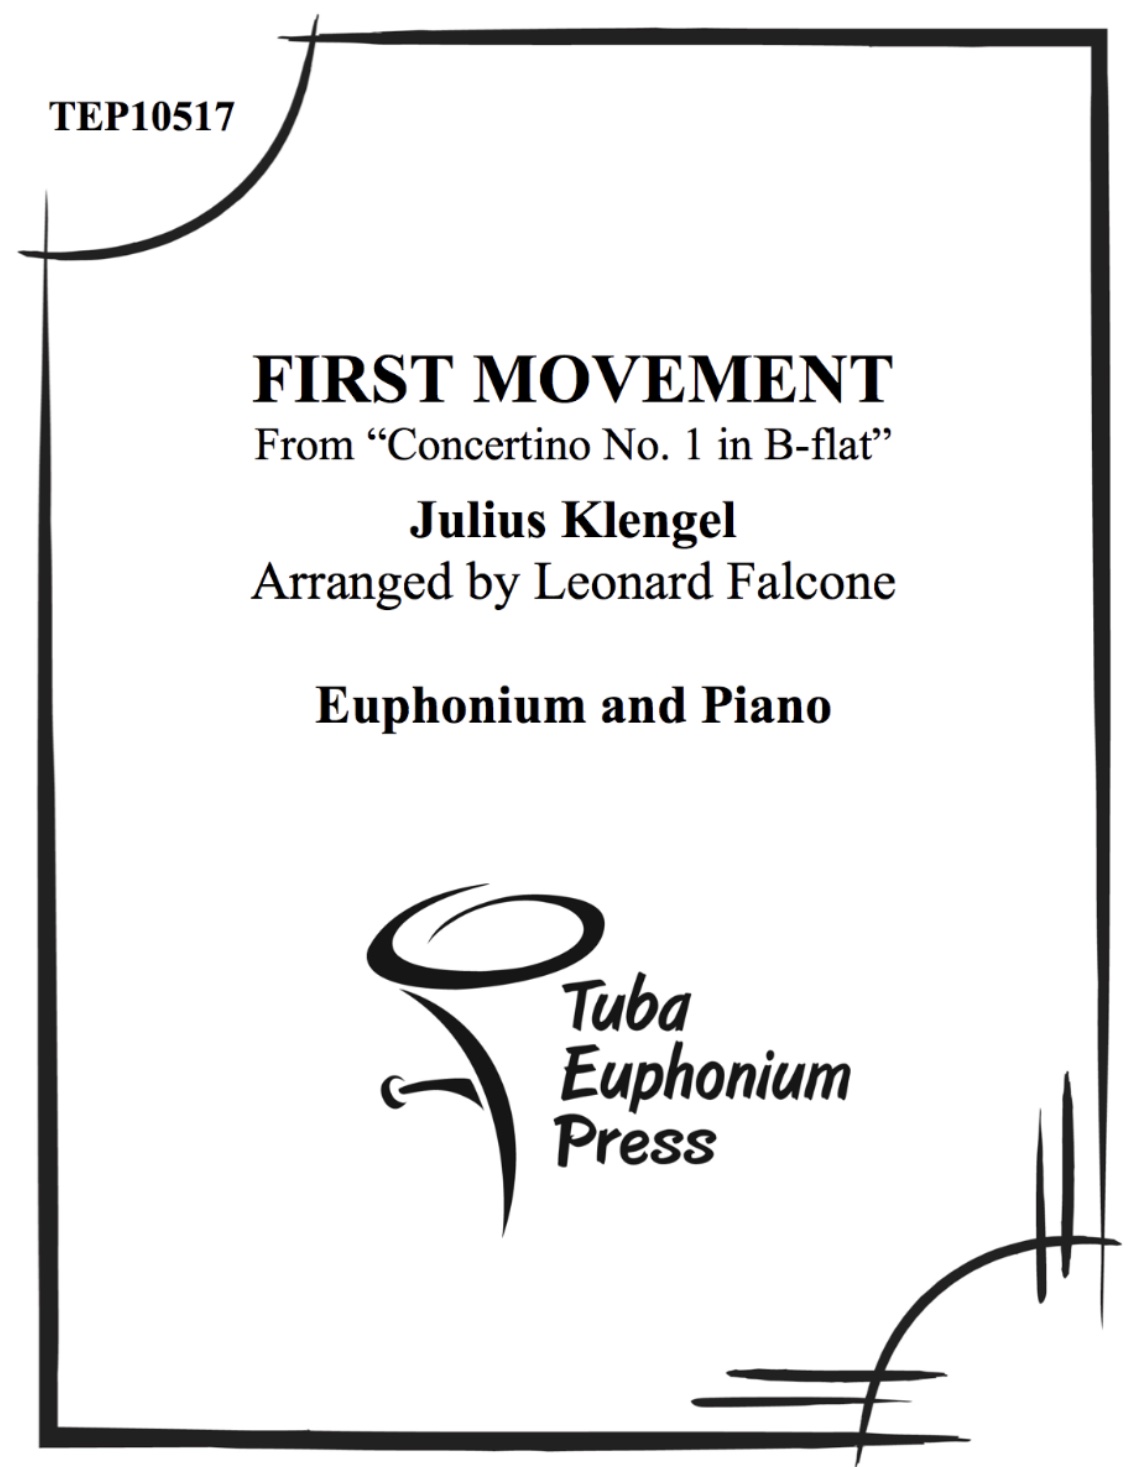 First Movement from Concertino No.1 in B flat - Julius Klengel Arr. Leonard Falcone - Euphonium and Piano